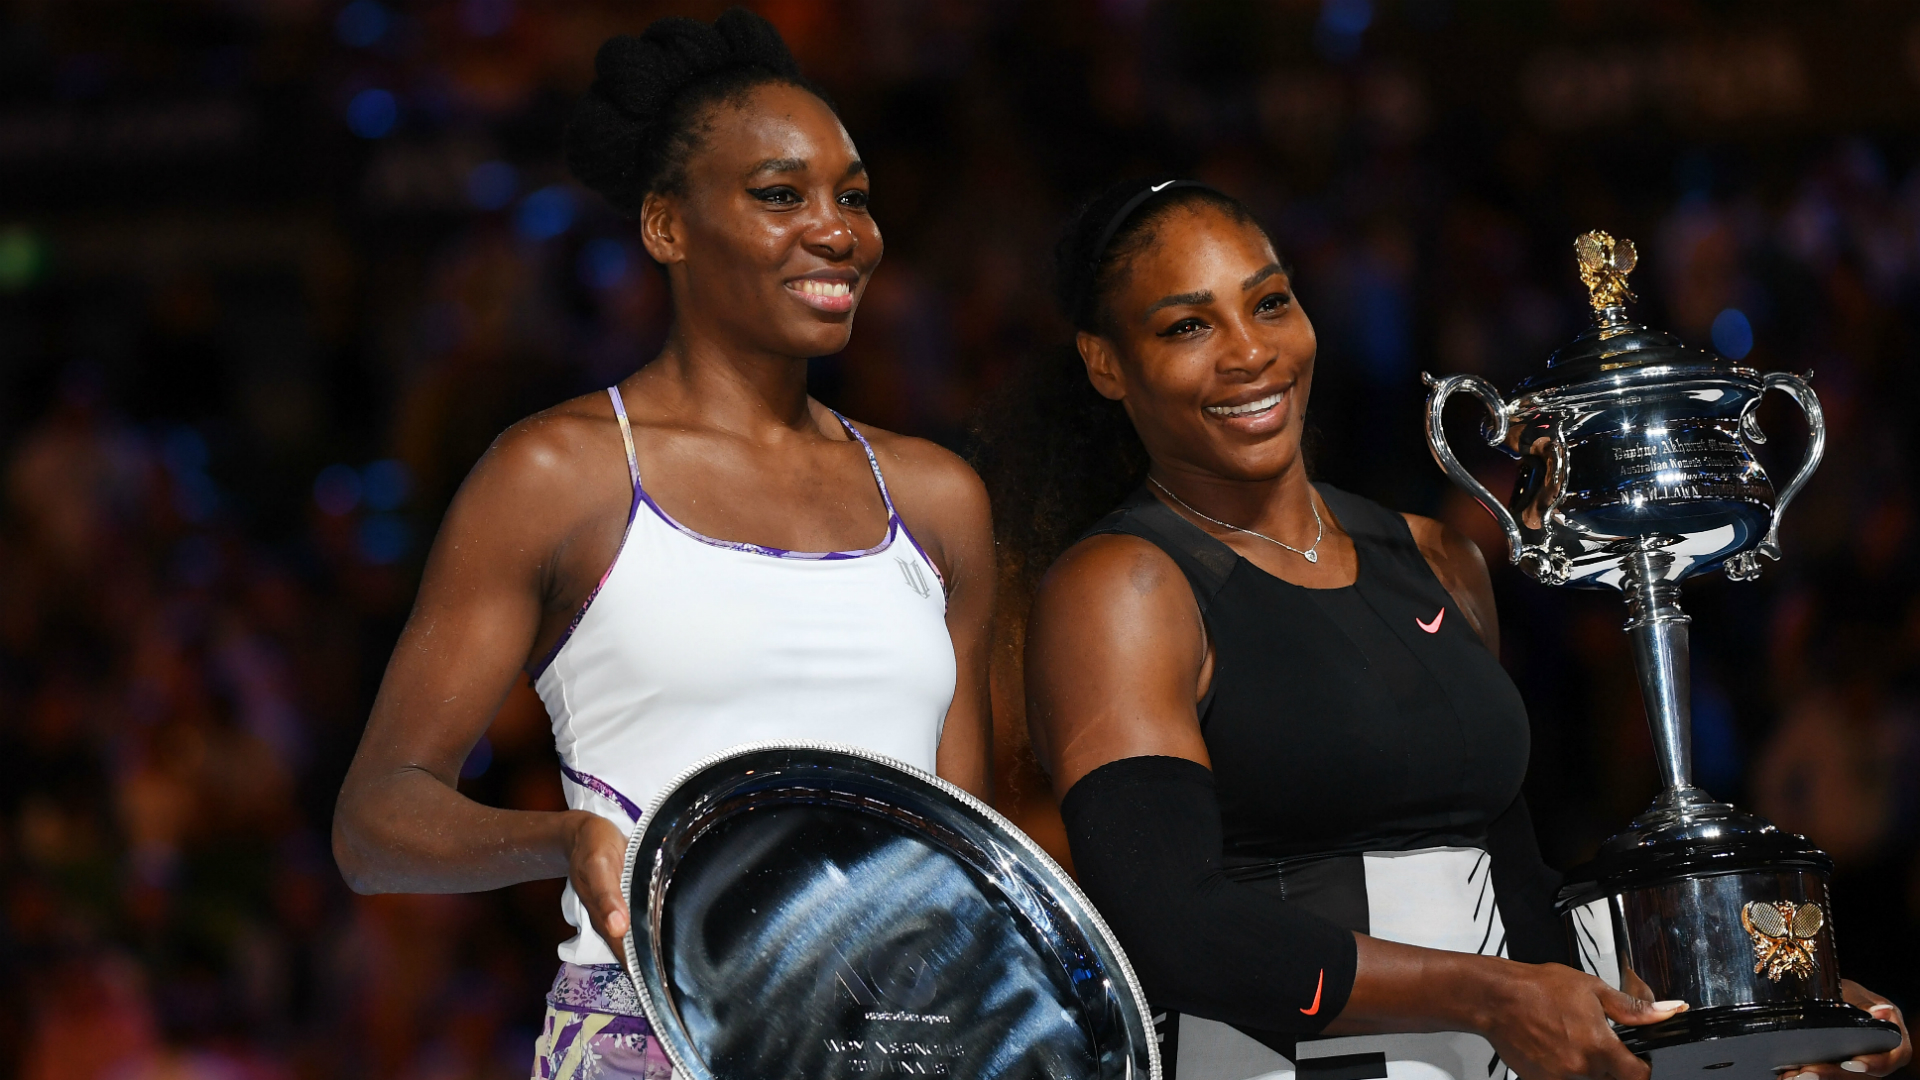 Venus Motivated For More After Watching Serena Win 23rd Slam